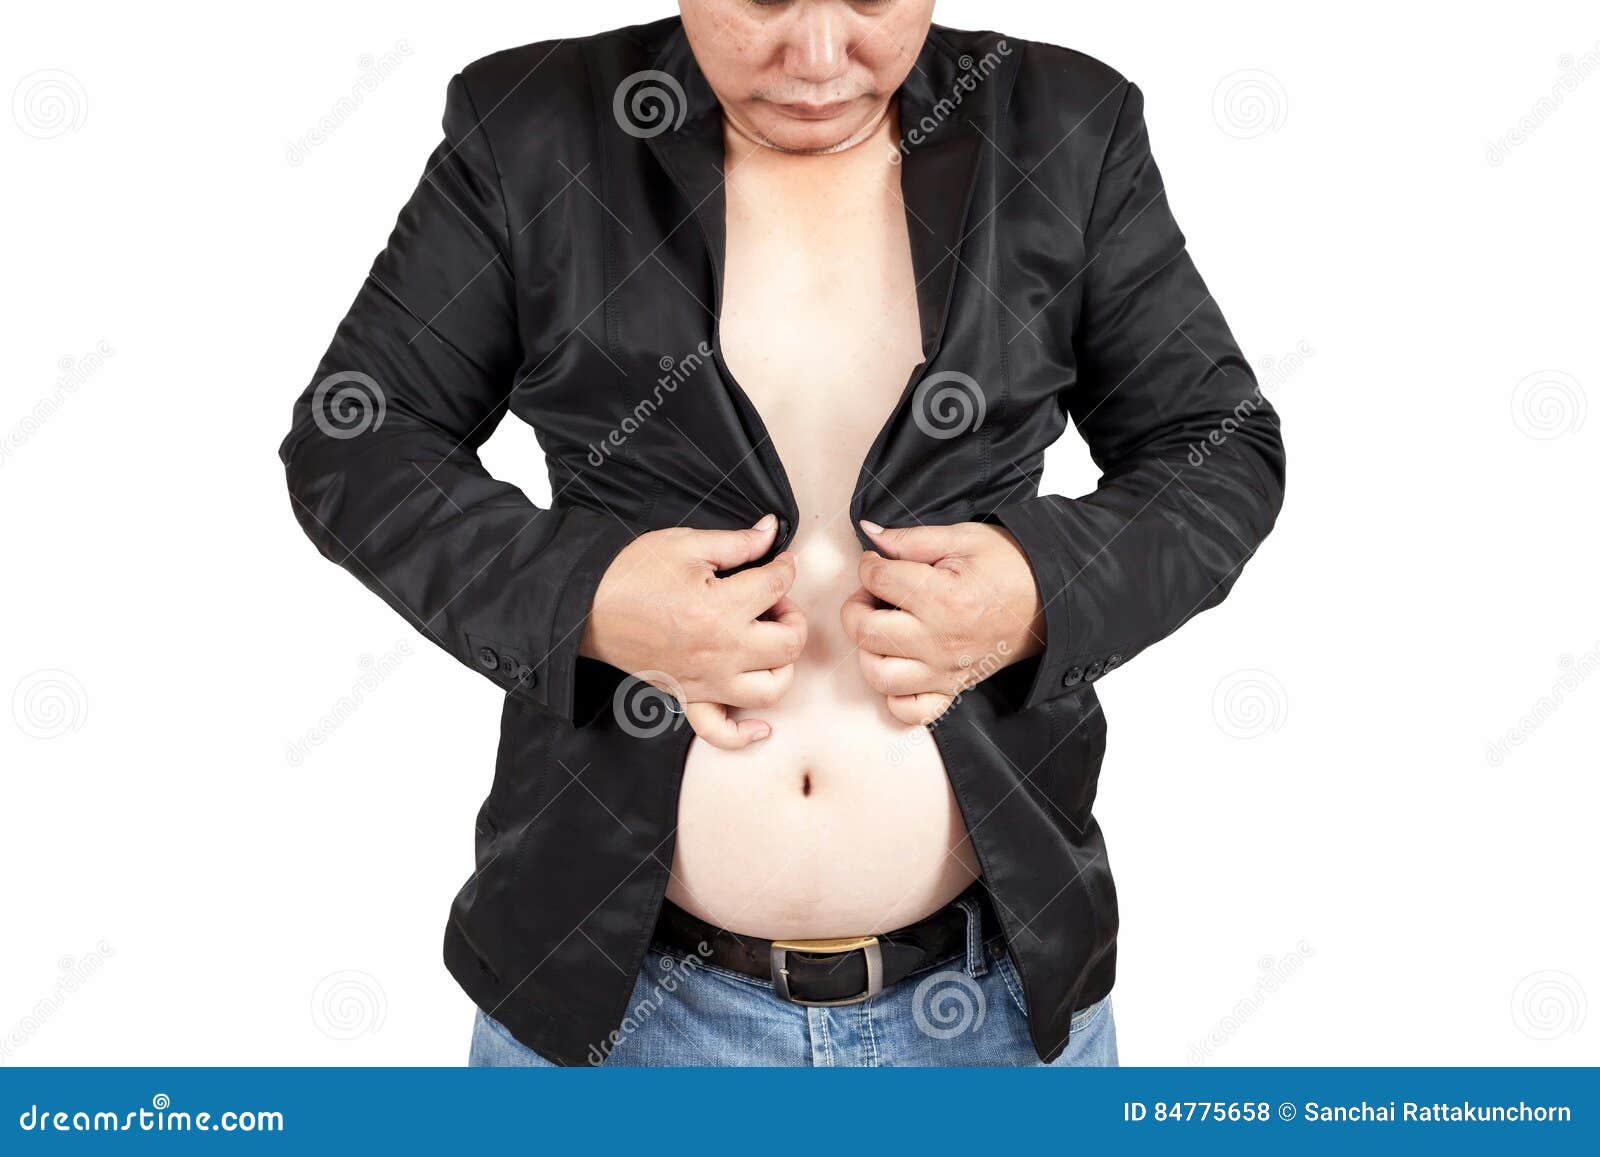 asian fat man trying to button his suits difficult to close th jacket big belly isolated white background 84775658